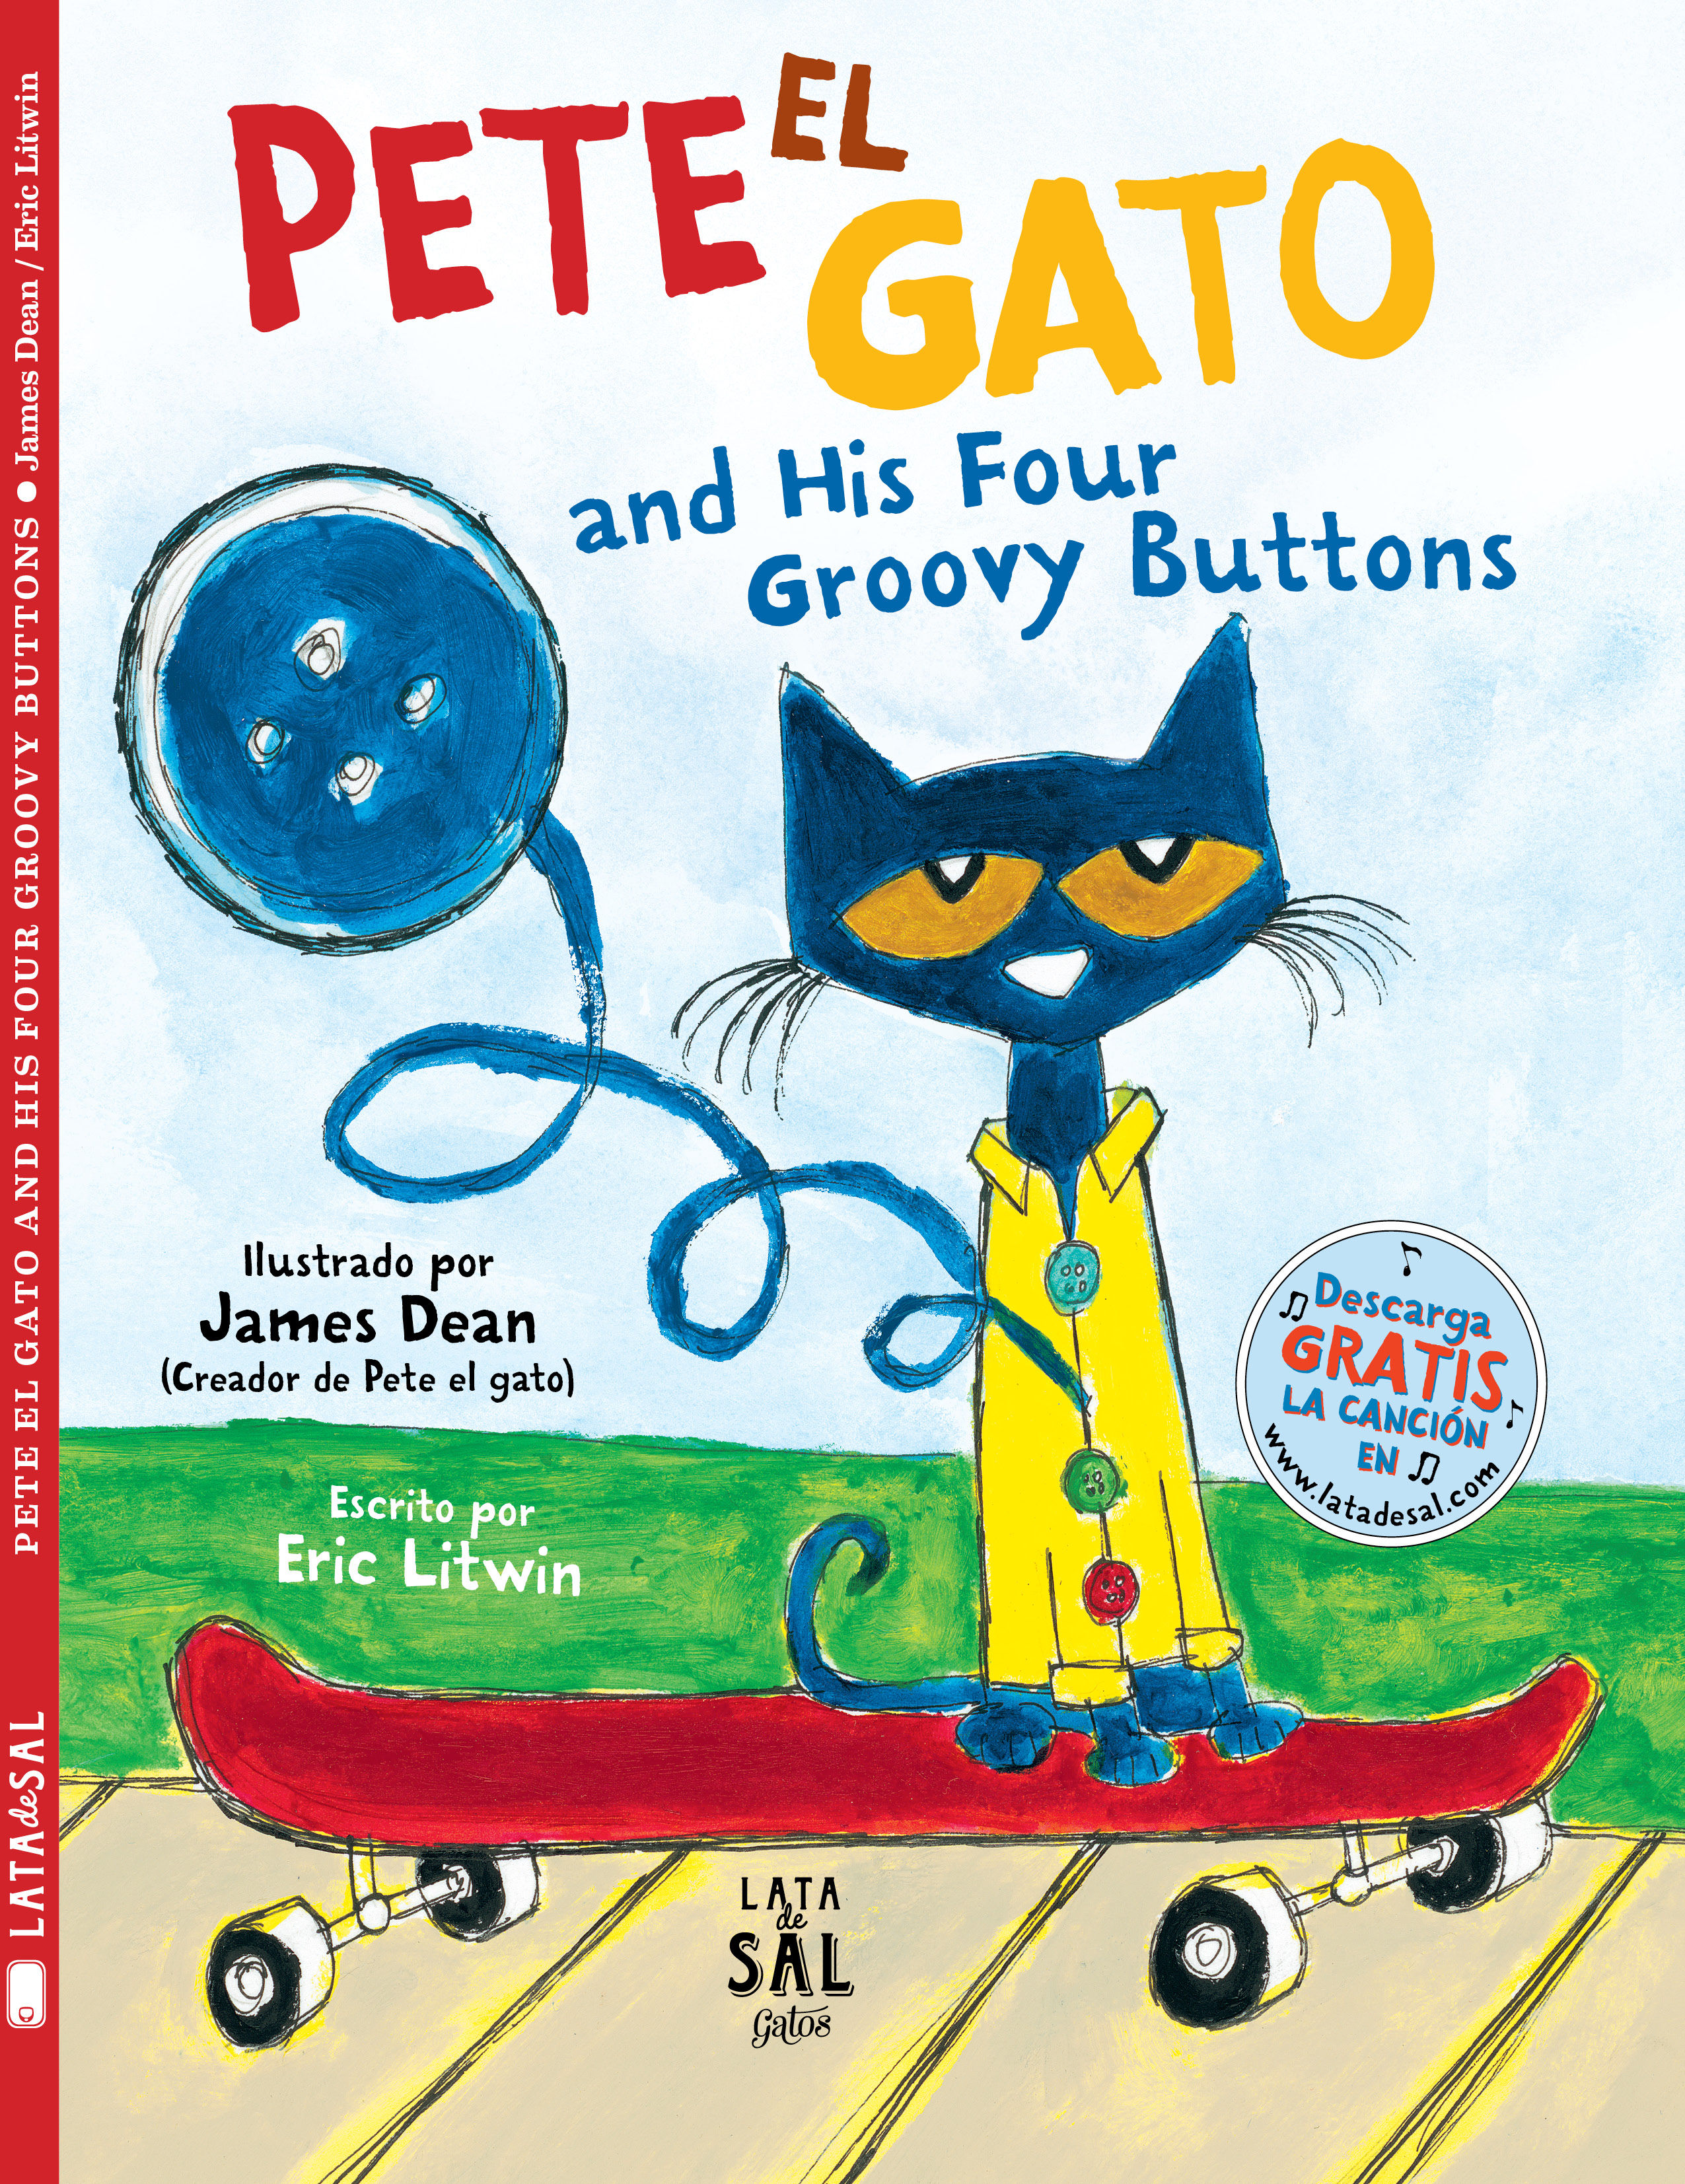 PETE EL GATO AND HIS FOUR GROOVY BUTTONS. 